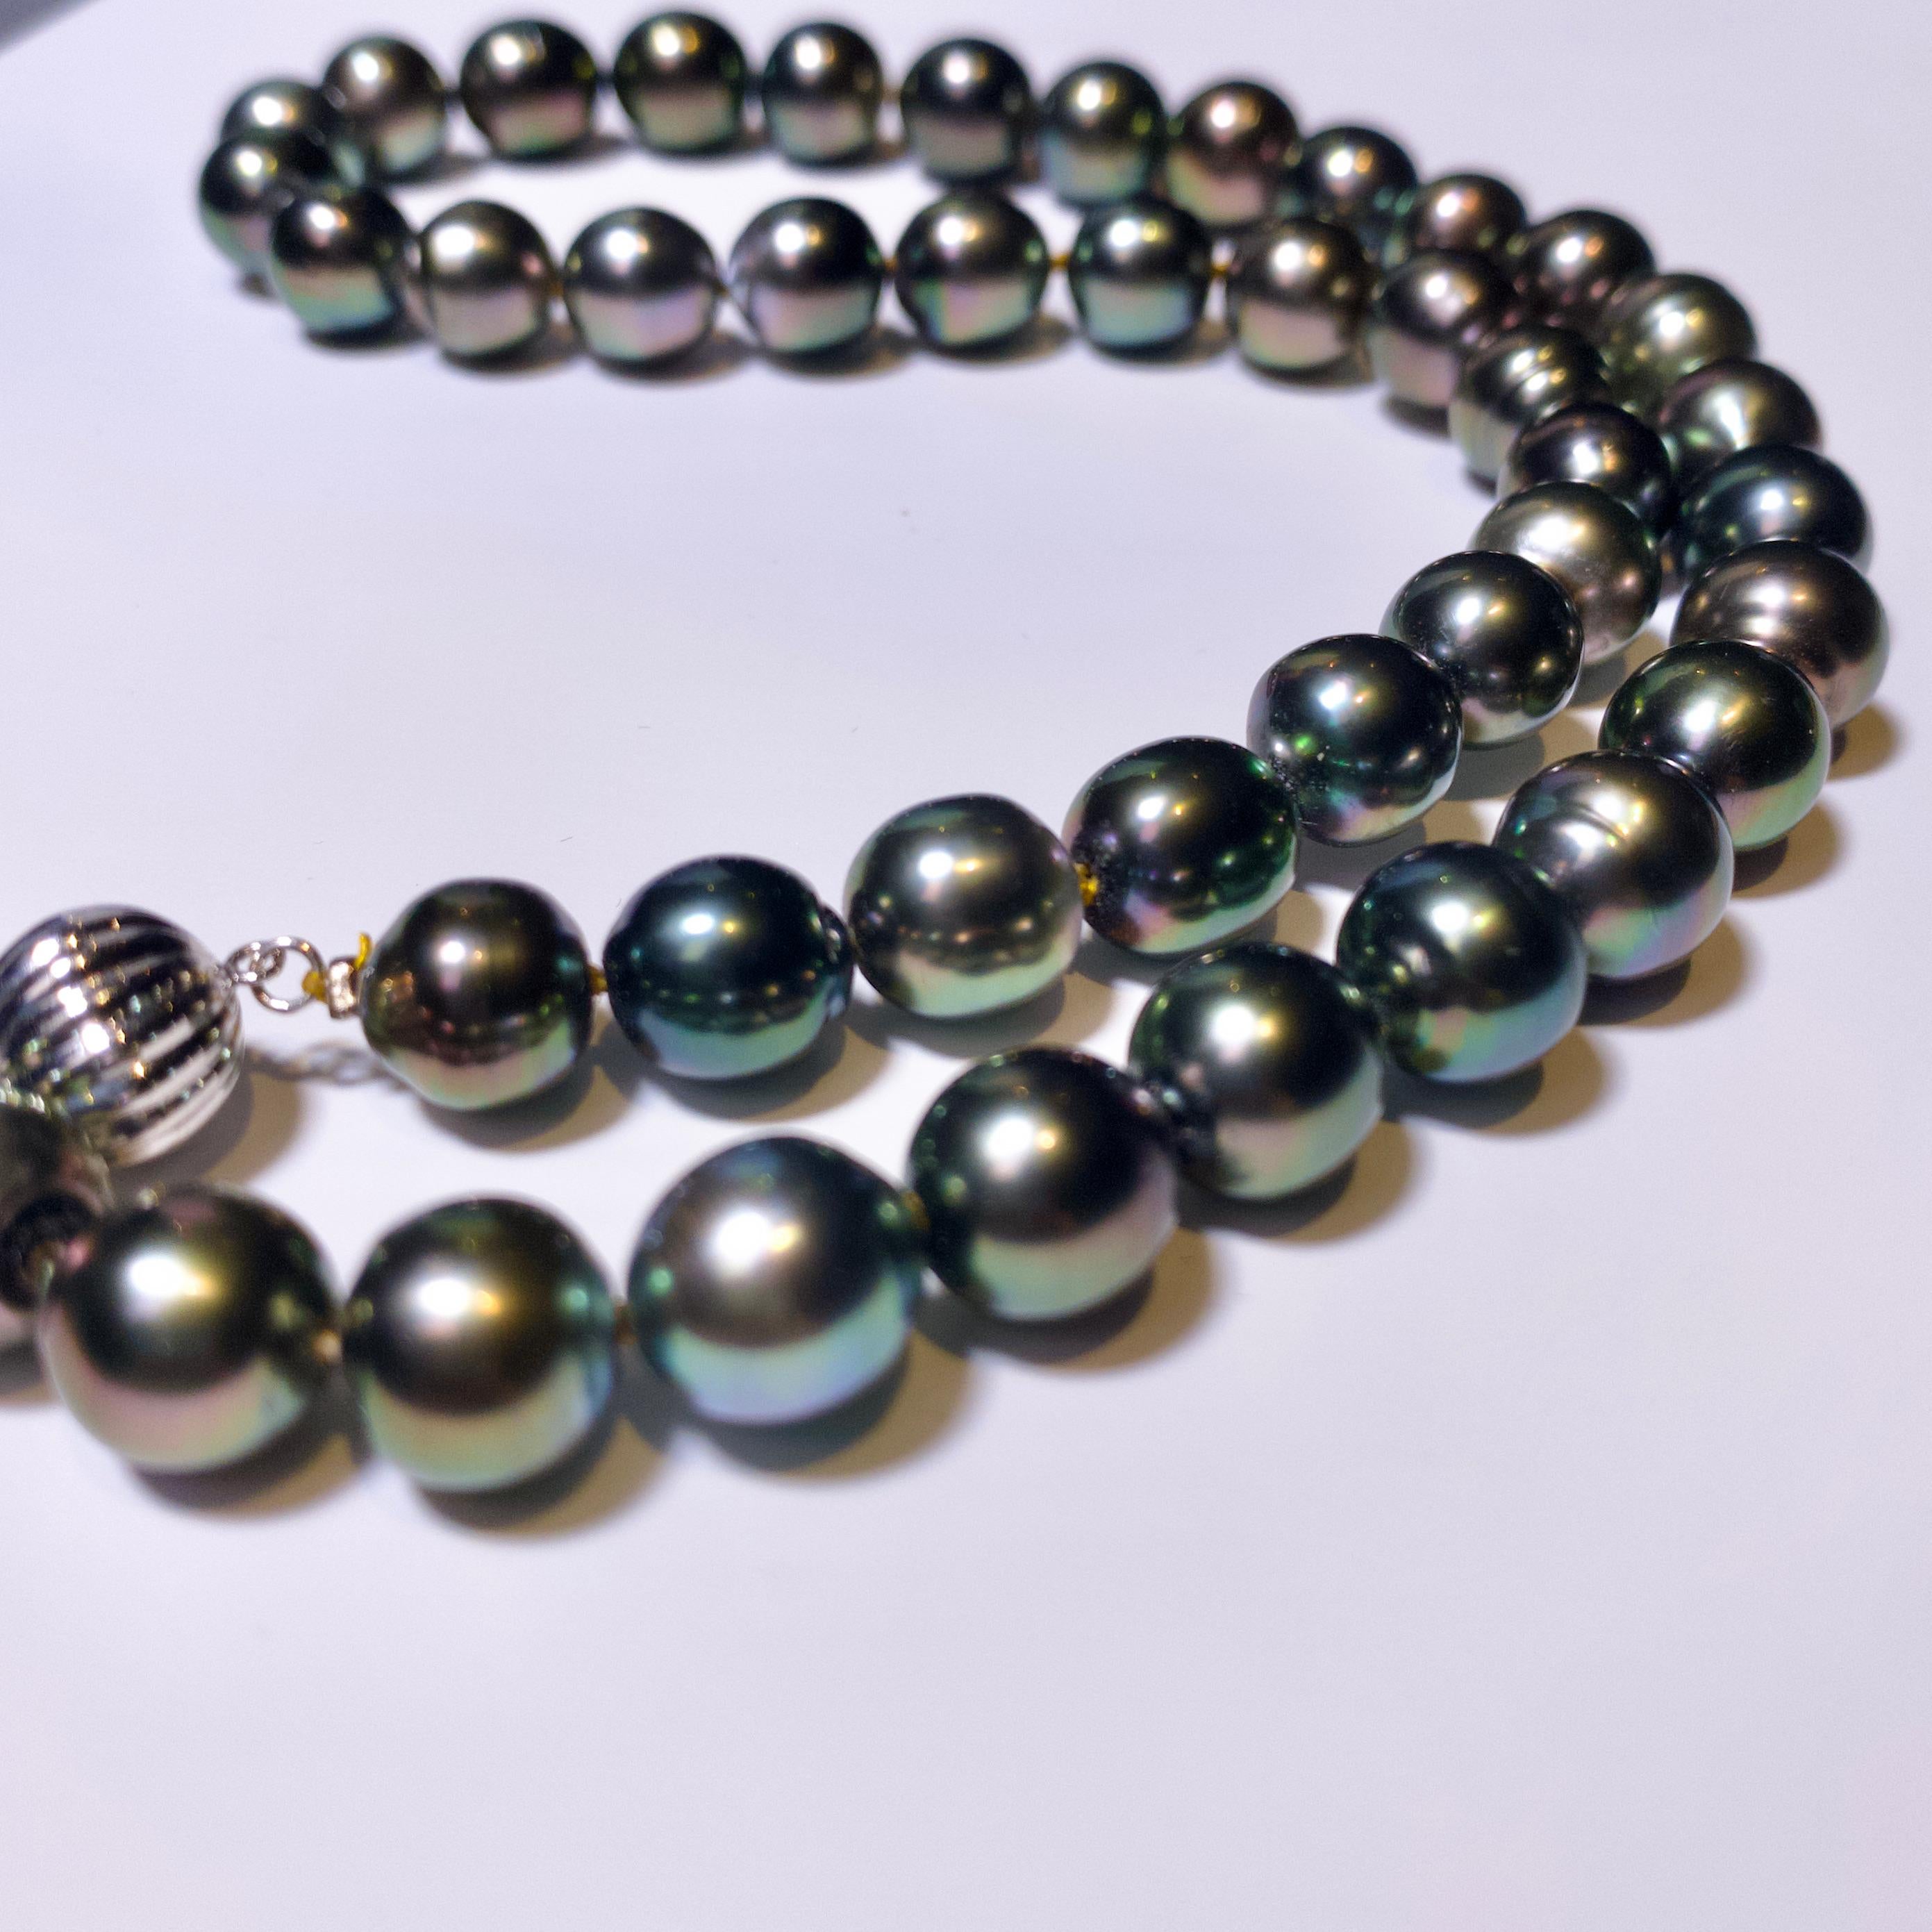 A Strand of Black Colour Green Tone Tahitian Pearl necklace with 18K Gold Clasp. The Pearls are showing plays of colour and it will be particularly obvious under natural light. This colour is called peacock green in trade and the colour of the